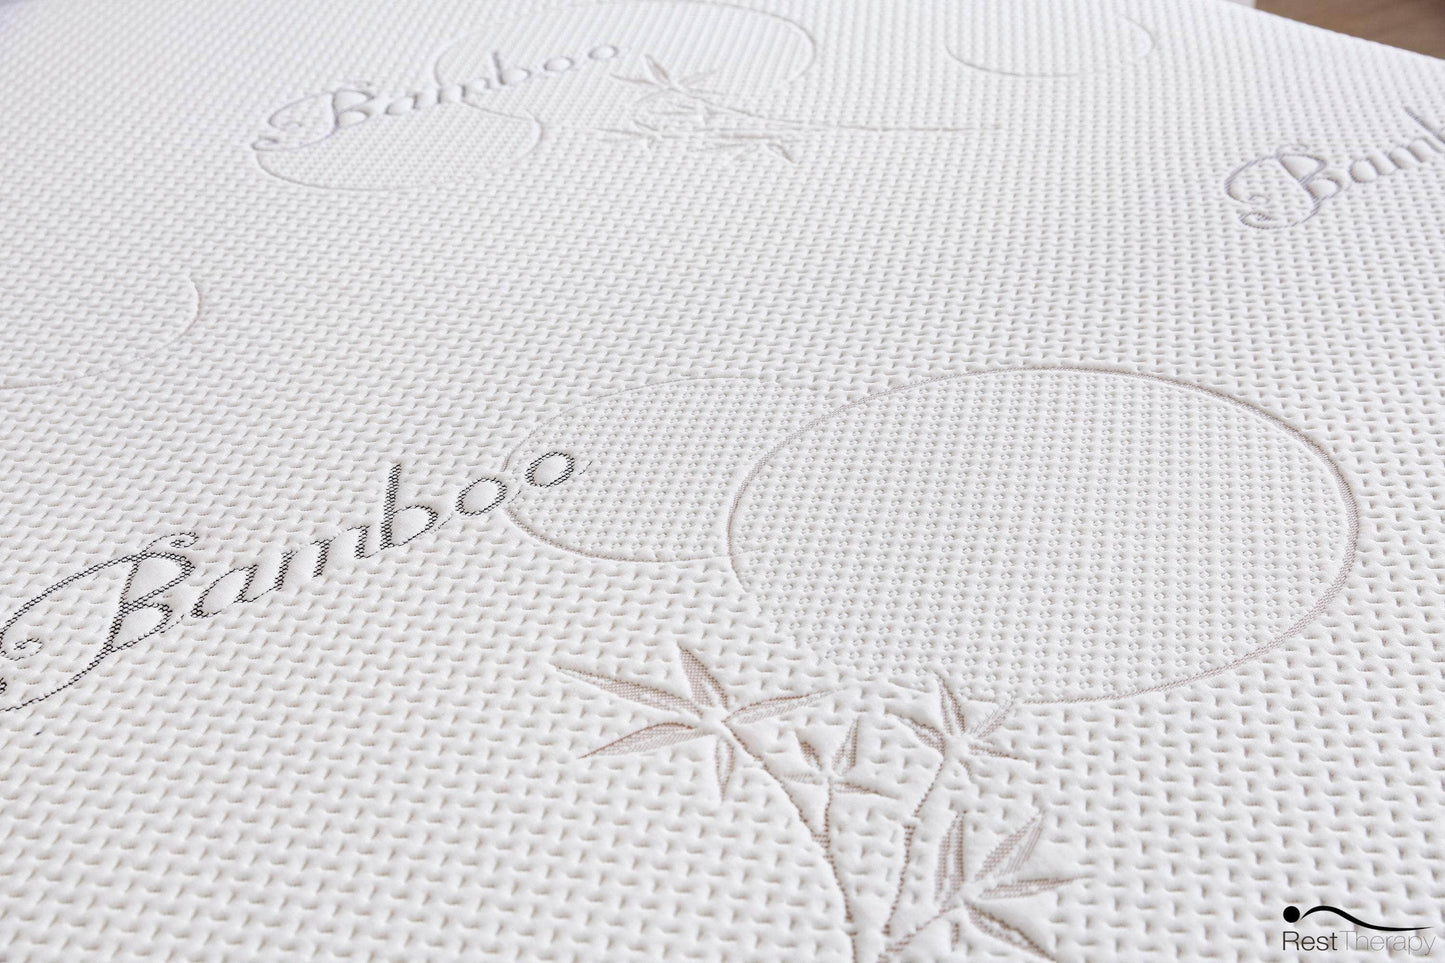 12 Inch Revive Bamboo Cool Gel Memory Foam Mattress - Available in 2 Sizes